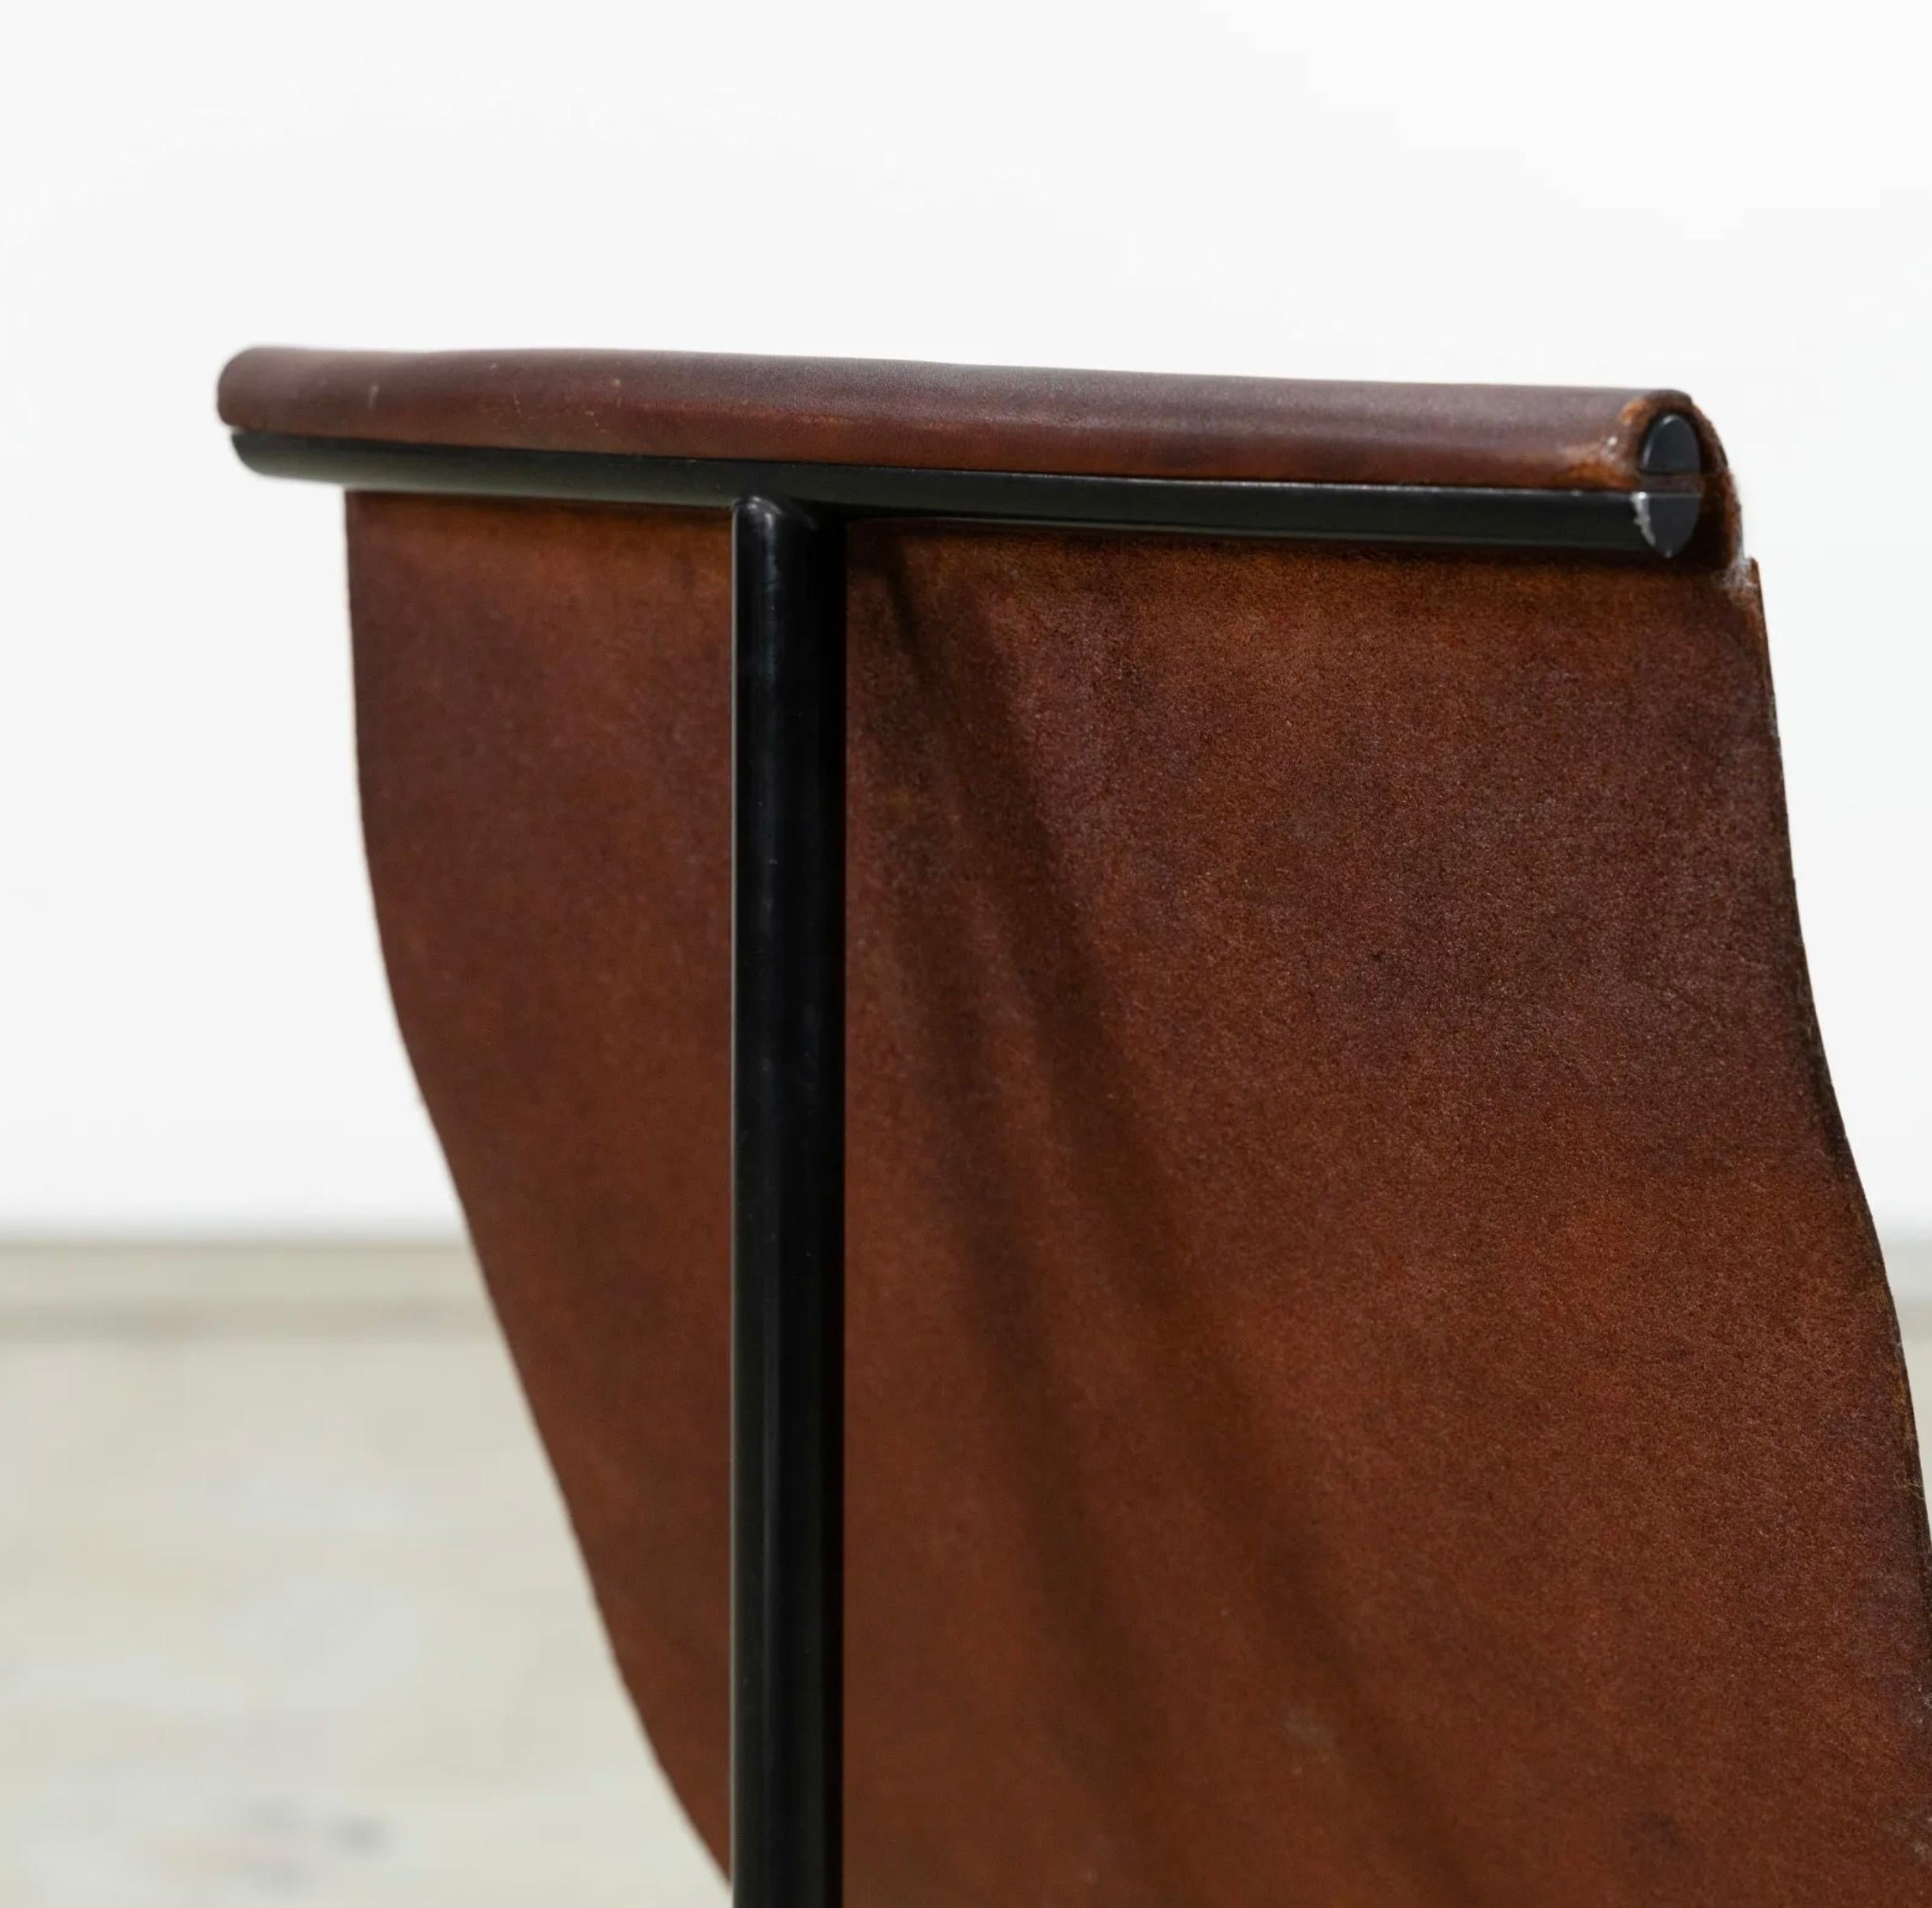 Katavolos, Kelley, and Littell, chair, black steel, enamelled steel and original cognac leather, United States, c. 1950.

A set of three-legged iconic mid-century modern leather chairs - both sculptural and functional. The leather is connected to